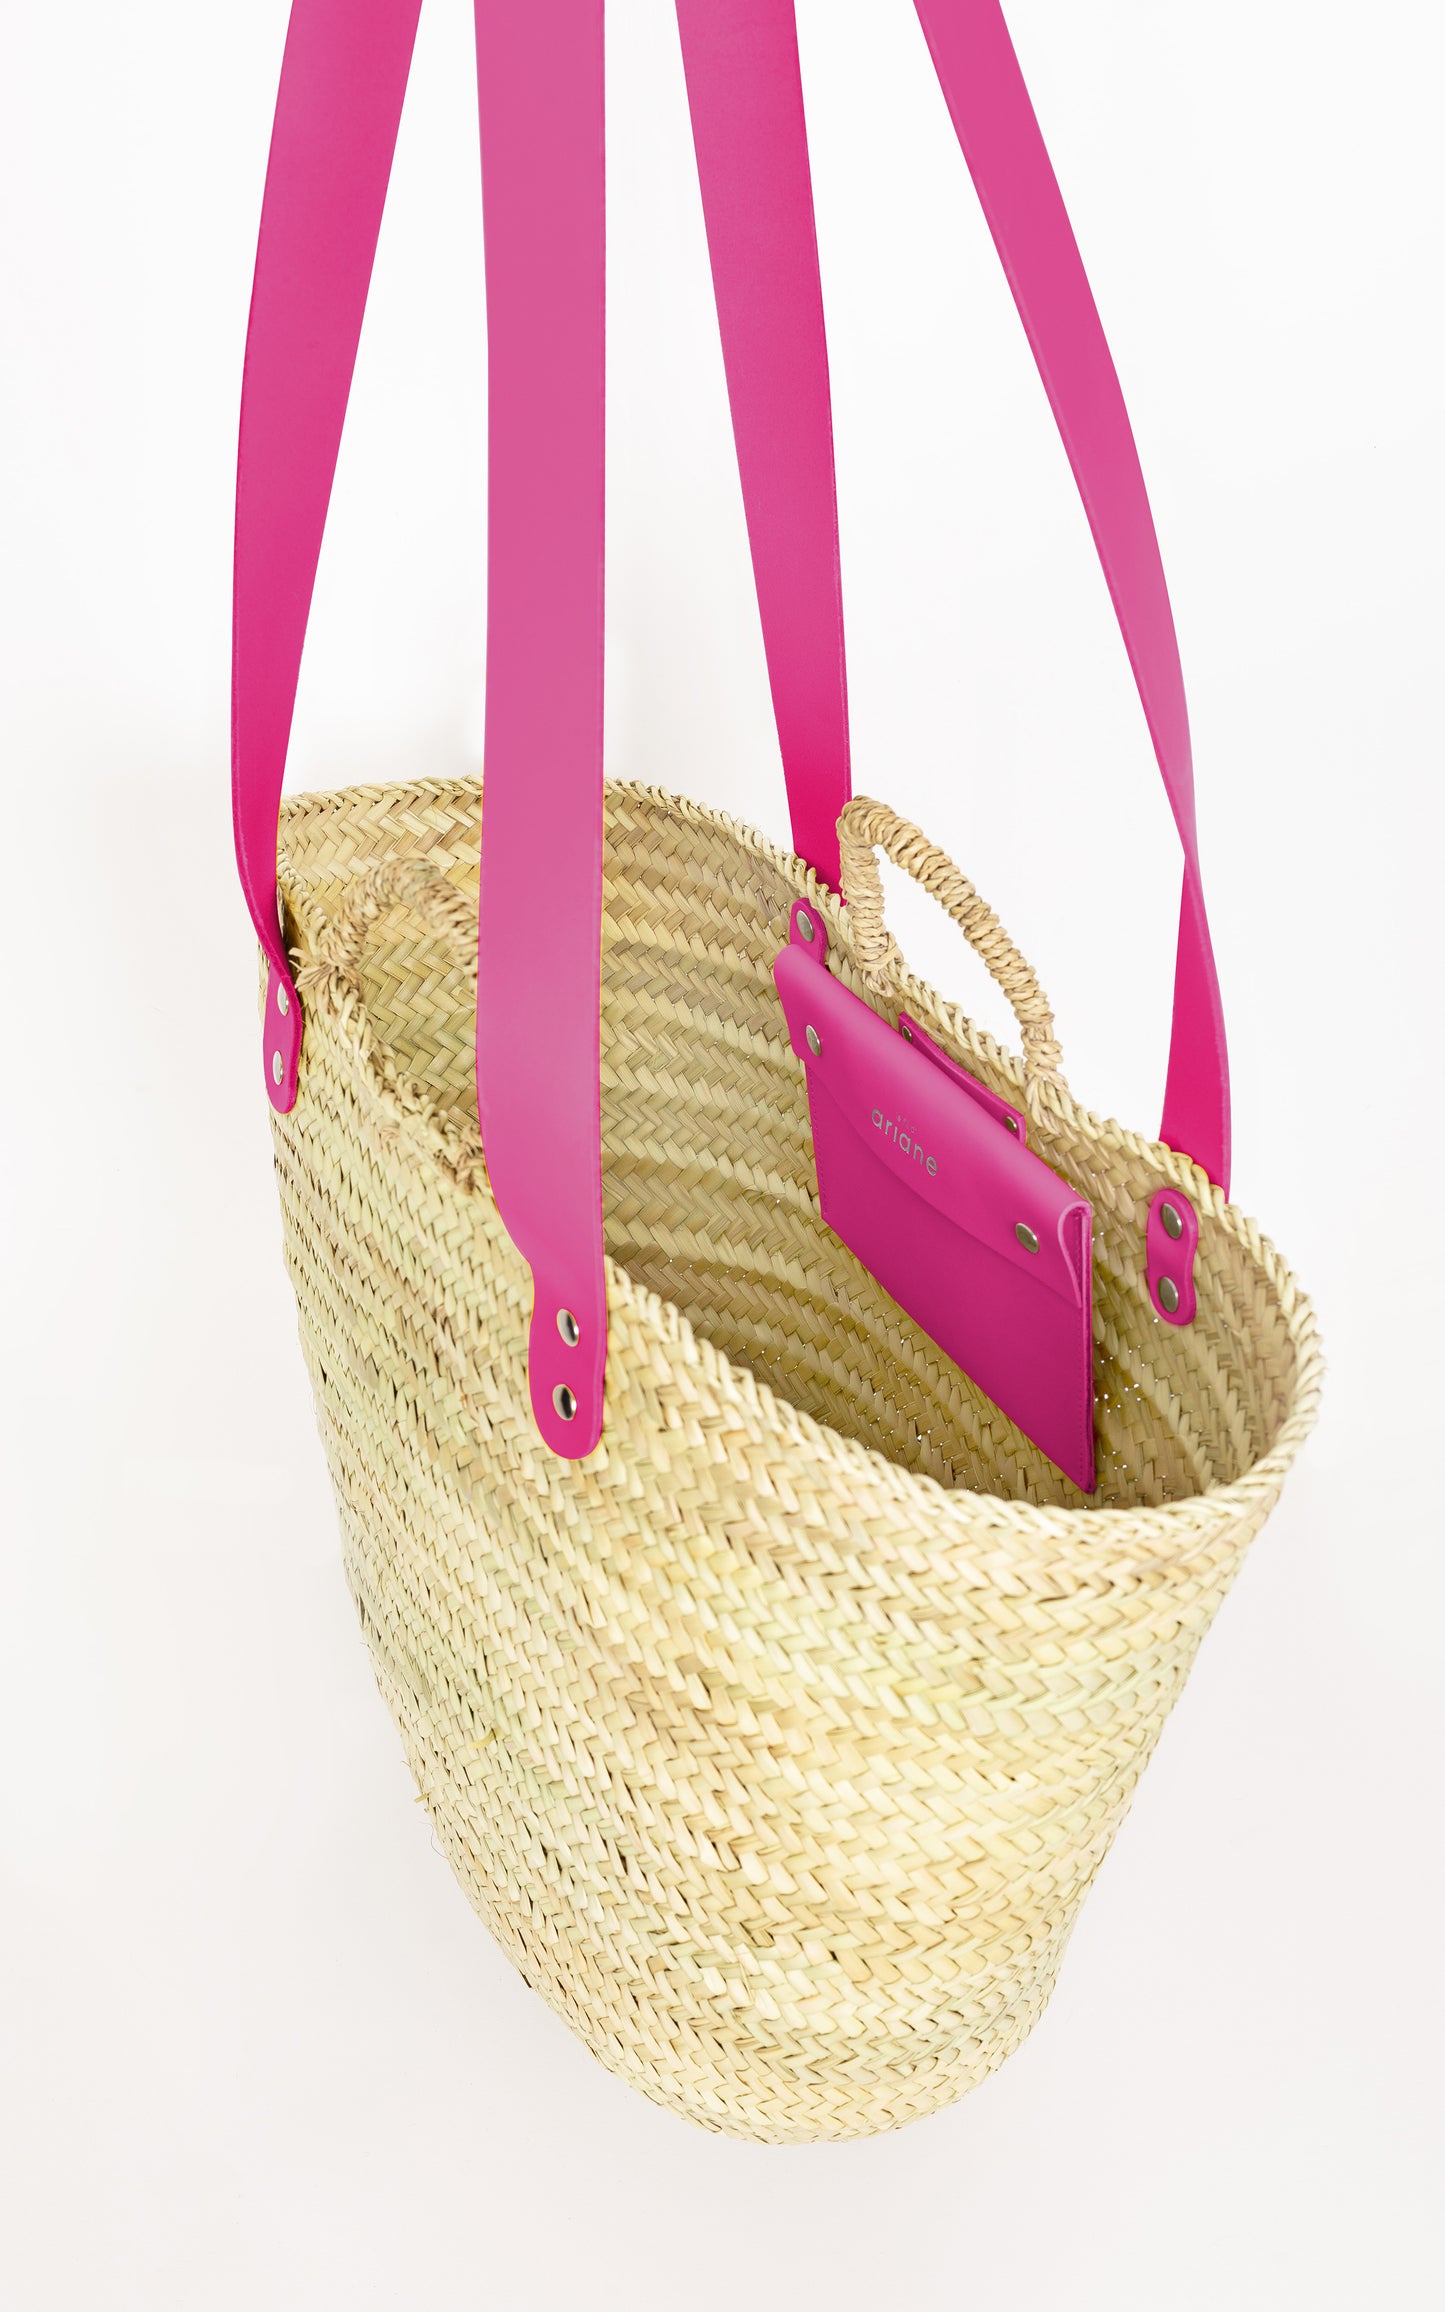 THESEE Basket - Size XL - Large Handles - Pink